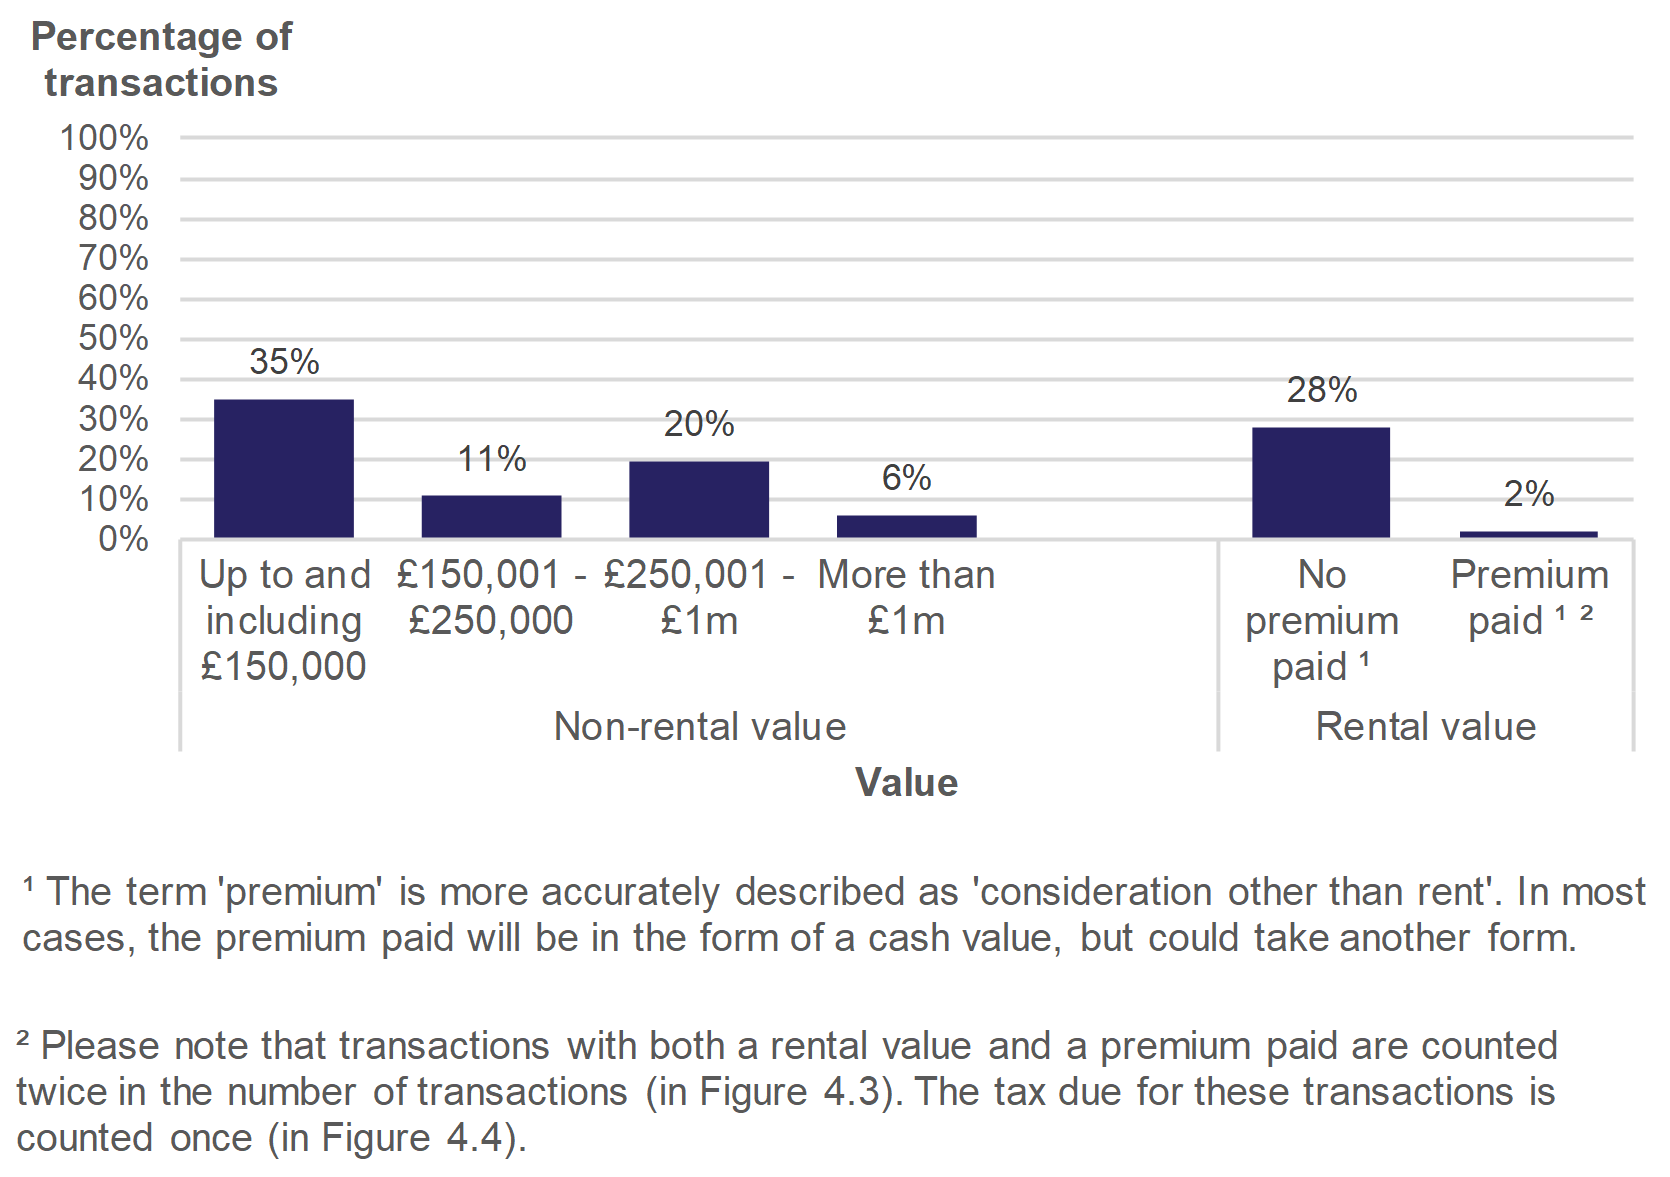 Figure 4.3 shows the number of non-residential transactions by value of the property. Data is presented as the percentage of transactions and relates to transactions effective in July to September 2019.